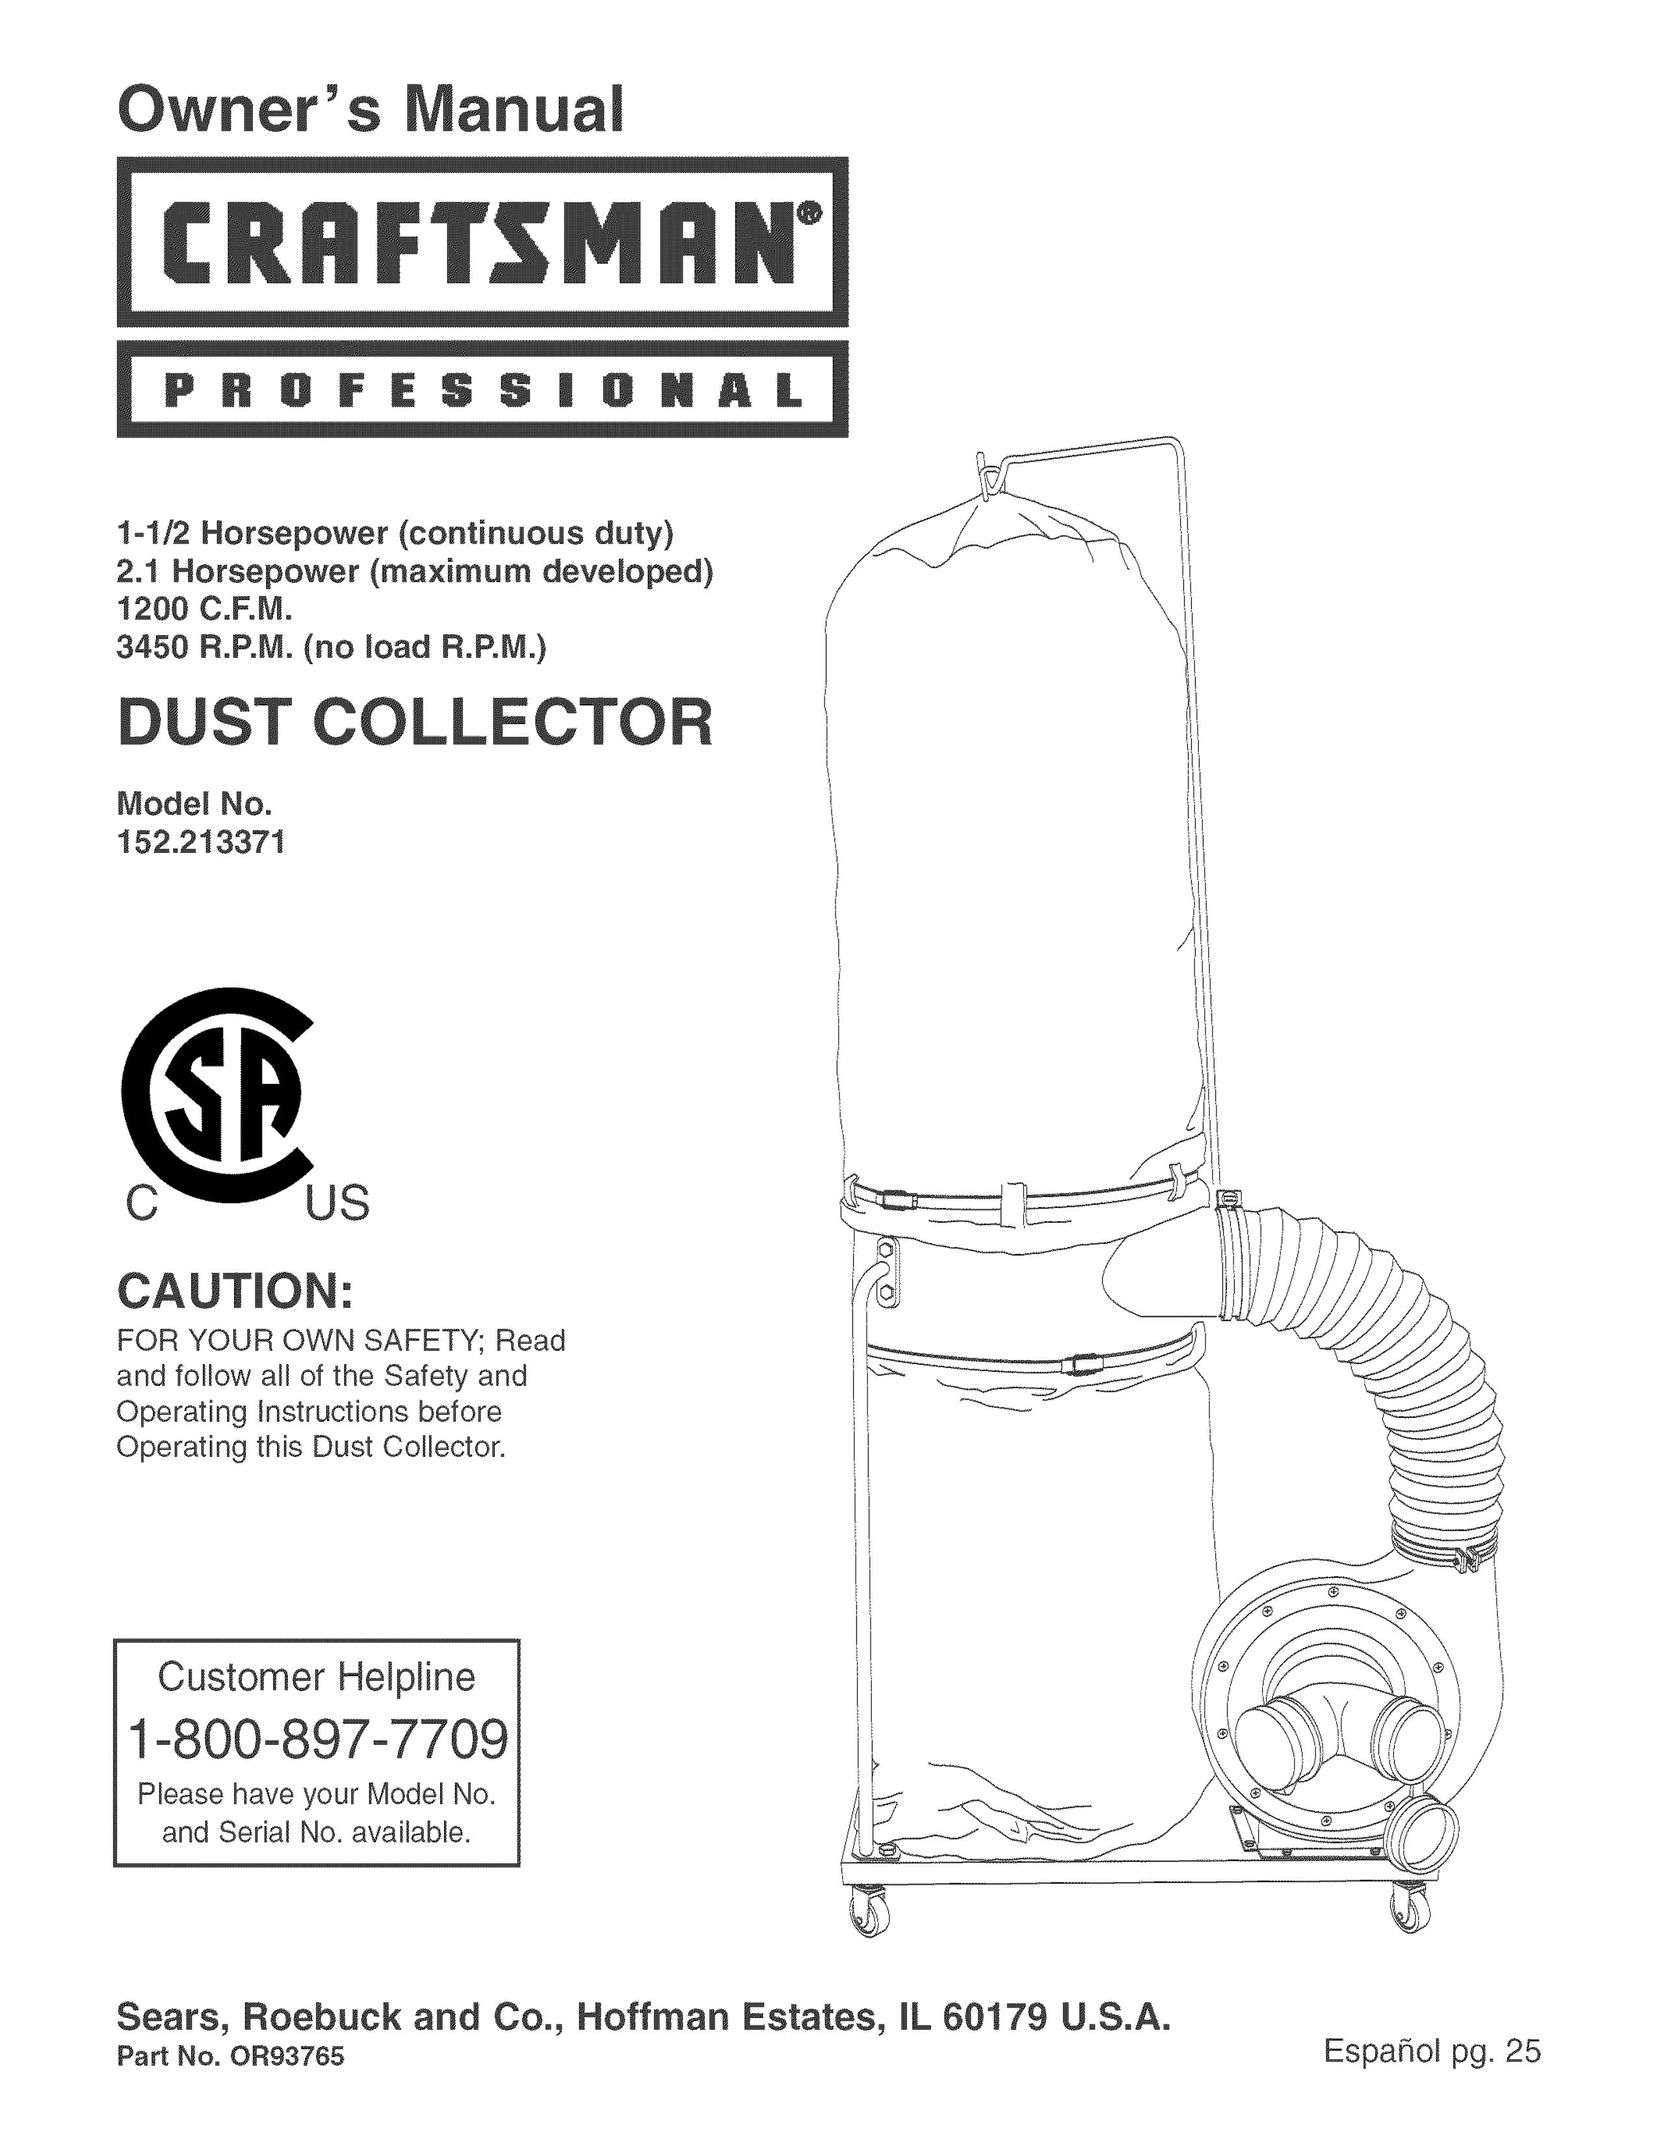 Craftsman 152.213371 Dust Collector User Manual